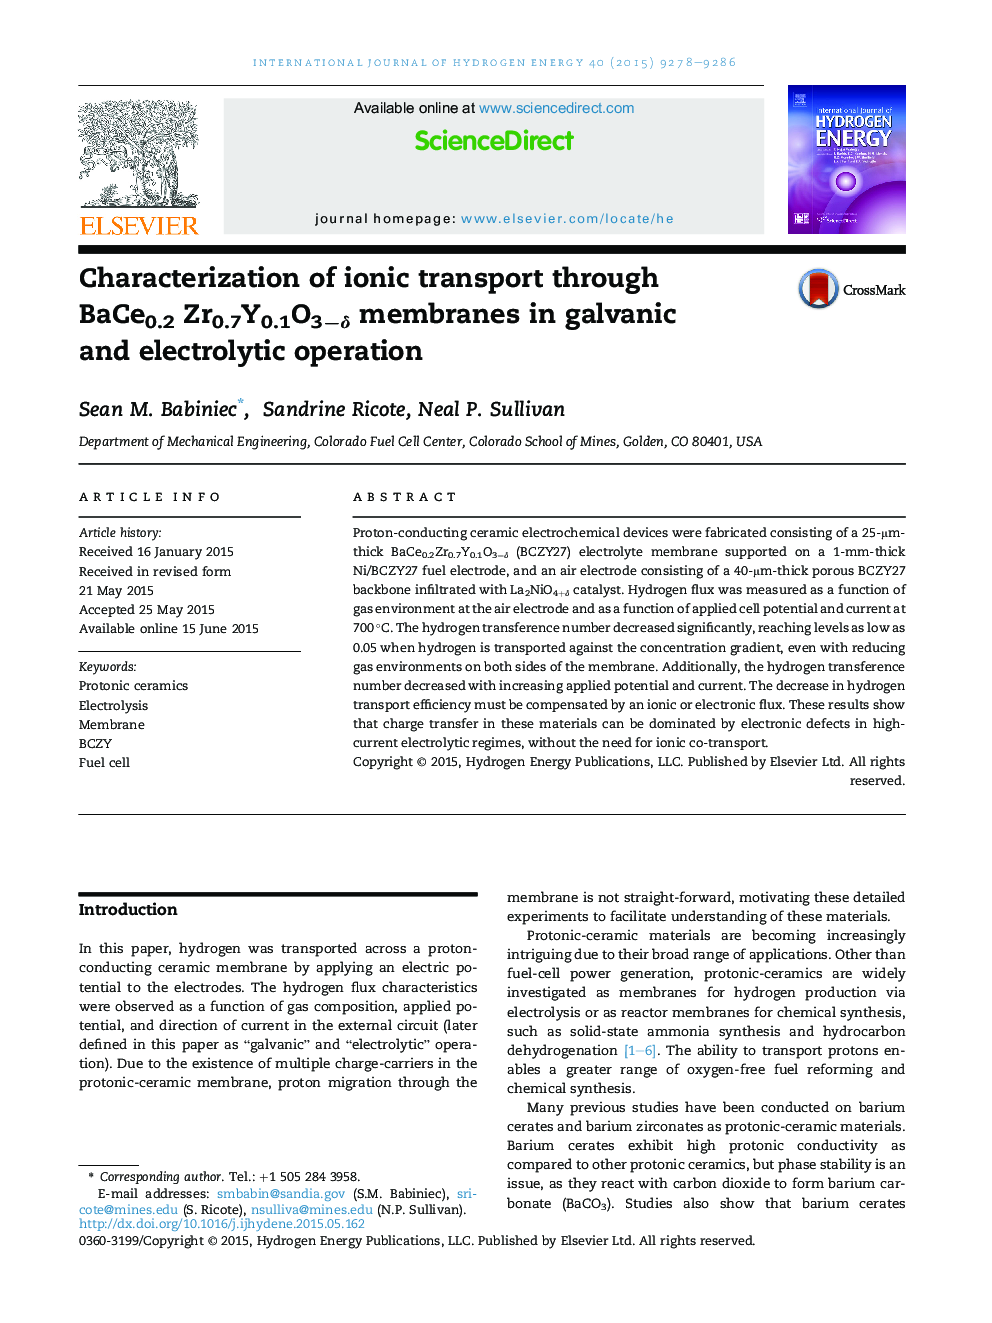 Characterization of ionic transport through BaCe0.2 Zr0.7Y0.1O3âÎ´ membranes in galvanic and electrolytic operation